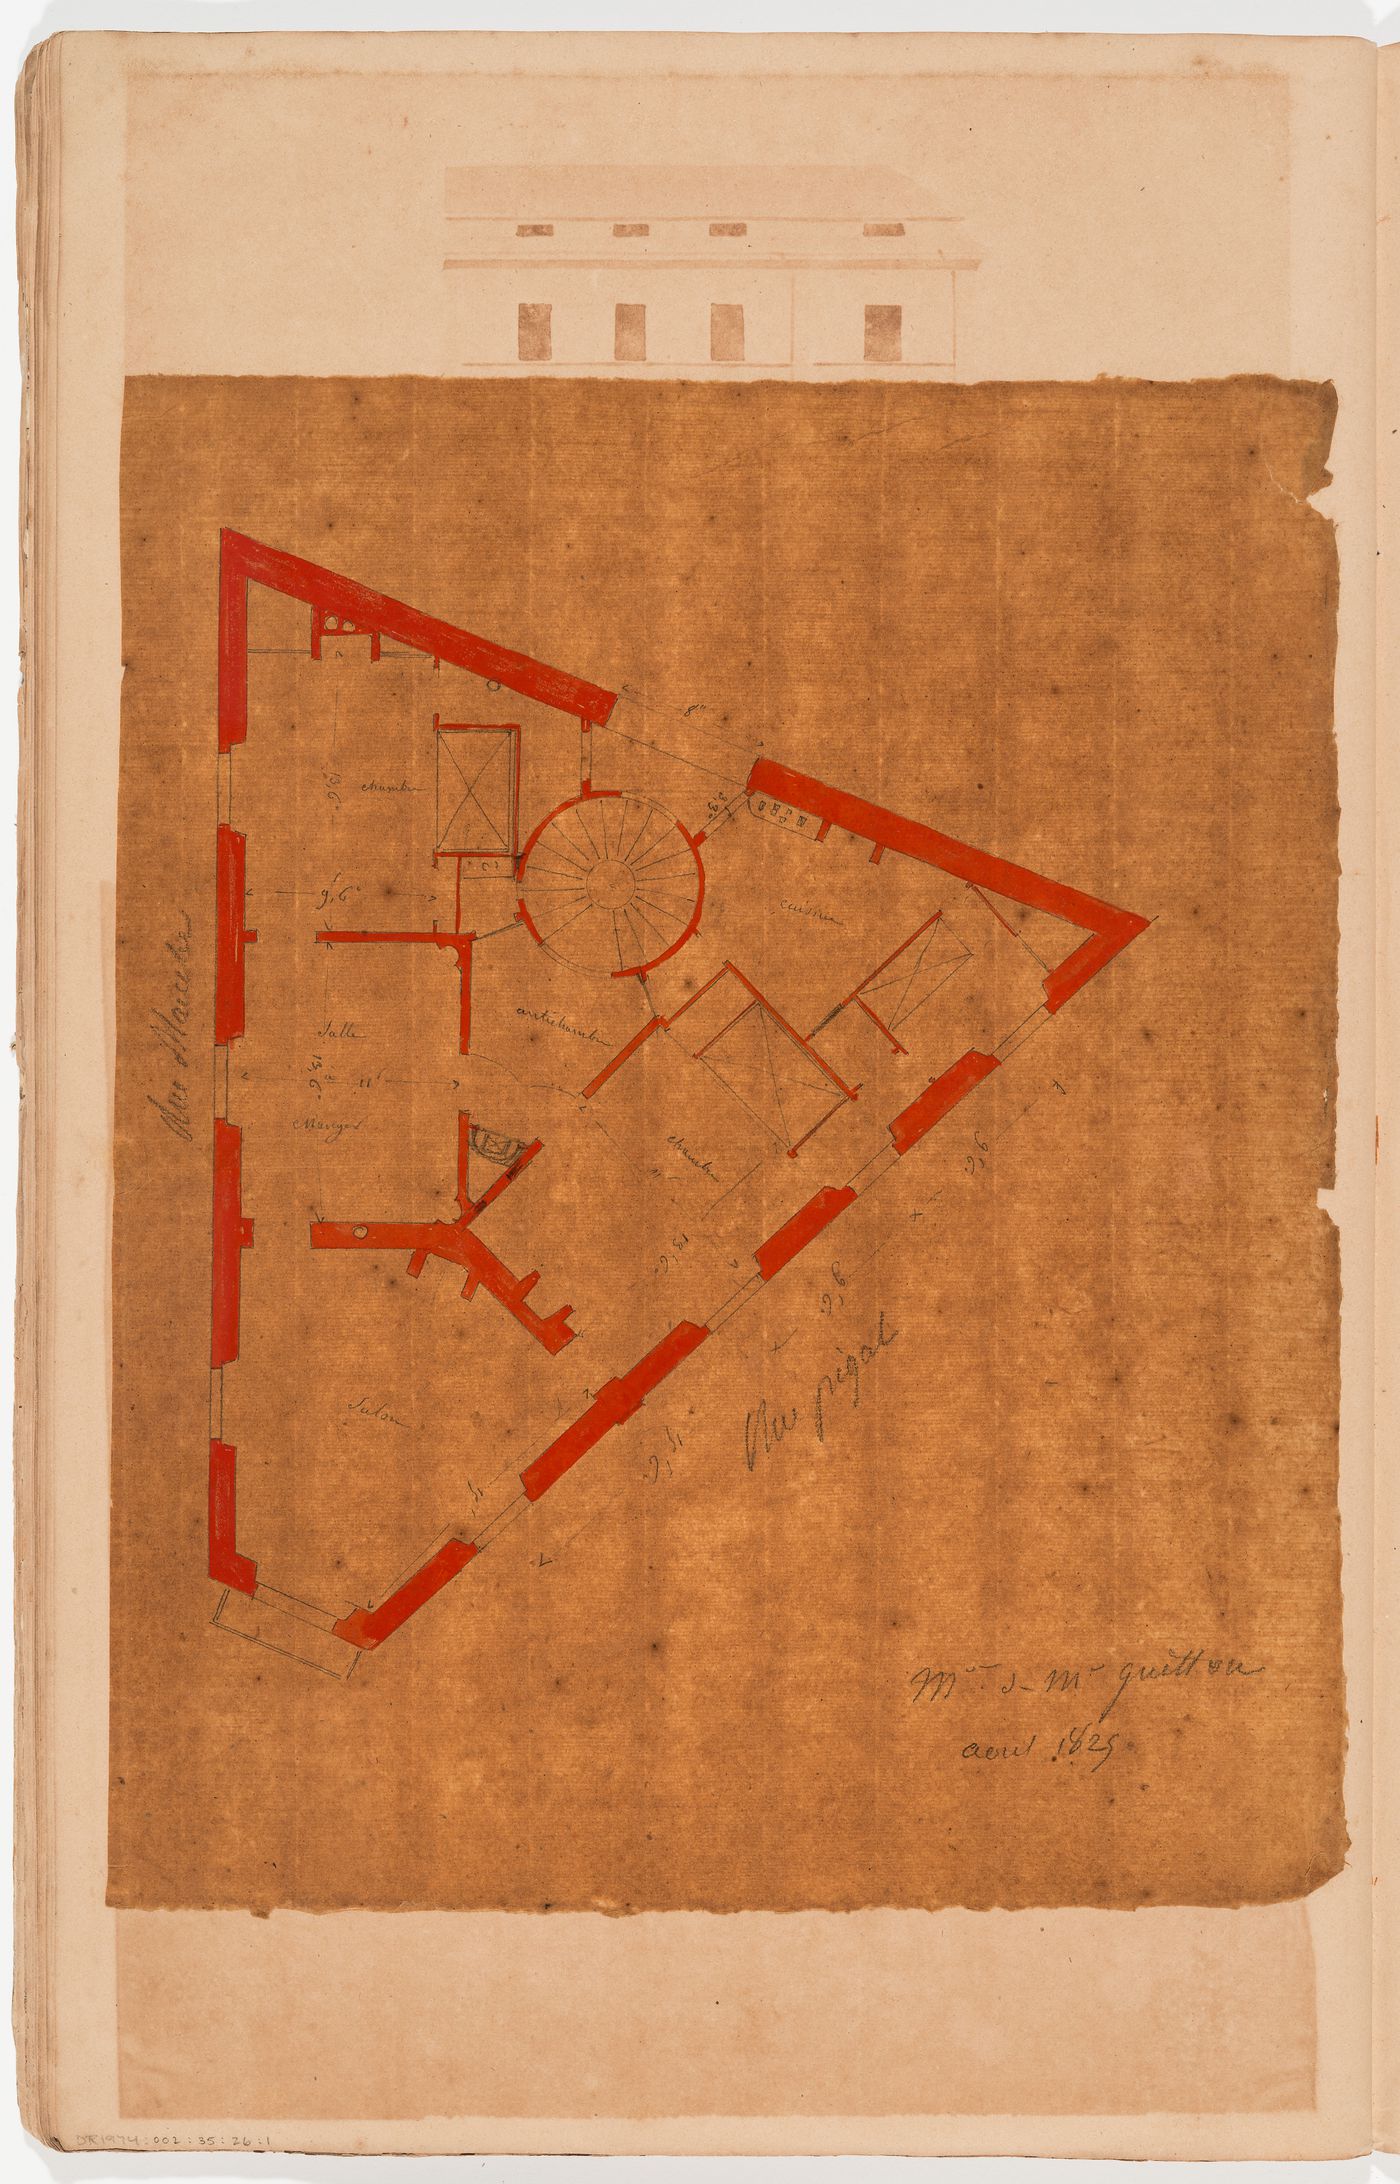 First floor plan for a house at the corner of rue de la Blanche and rue Pigalle, Paris